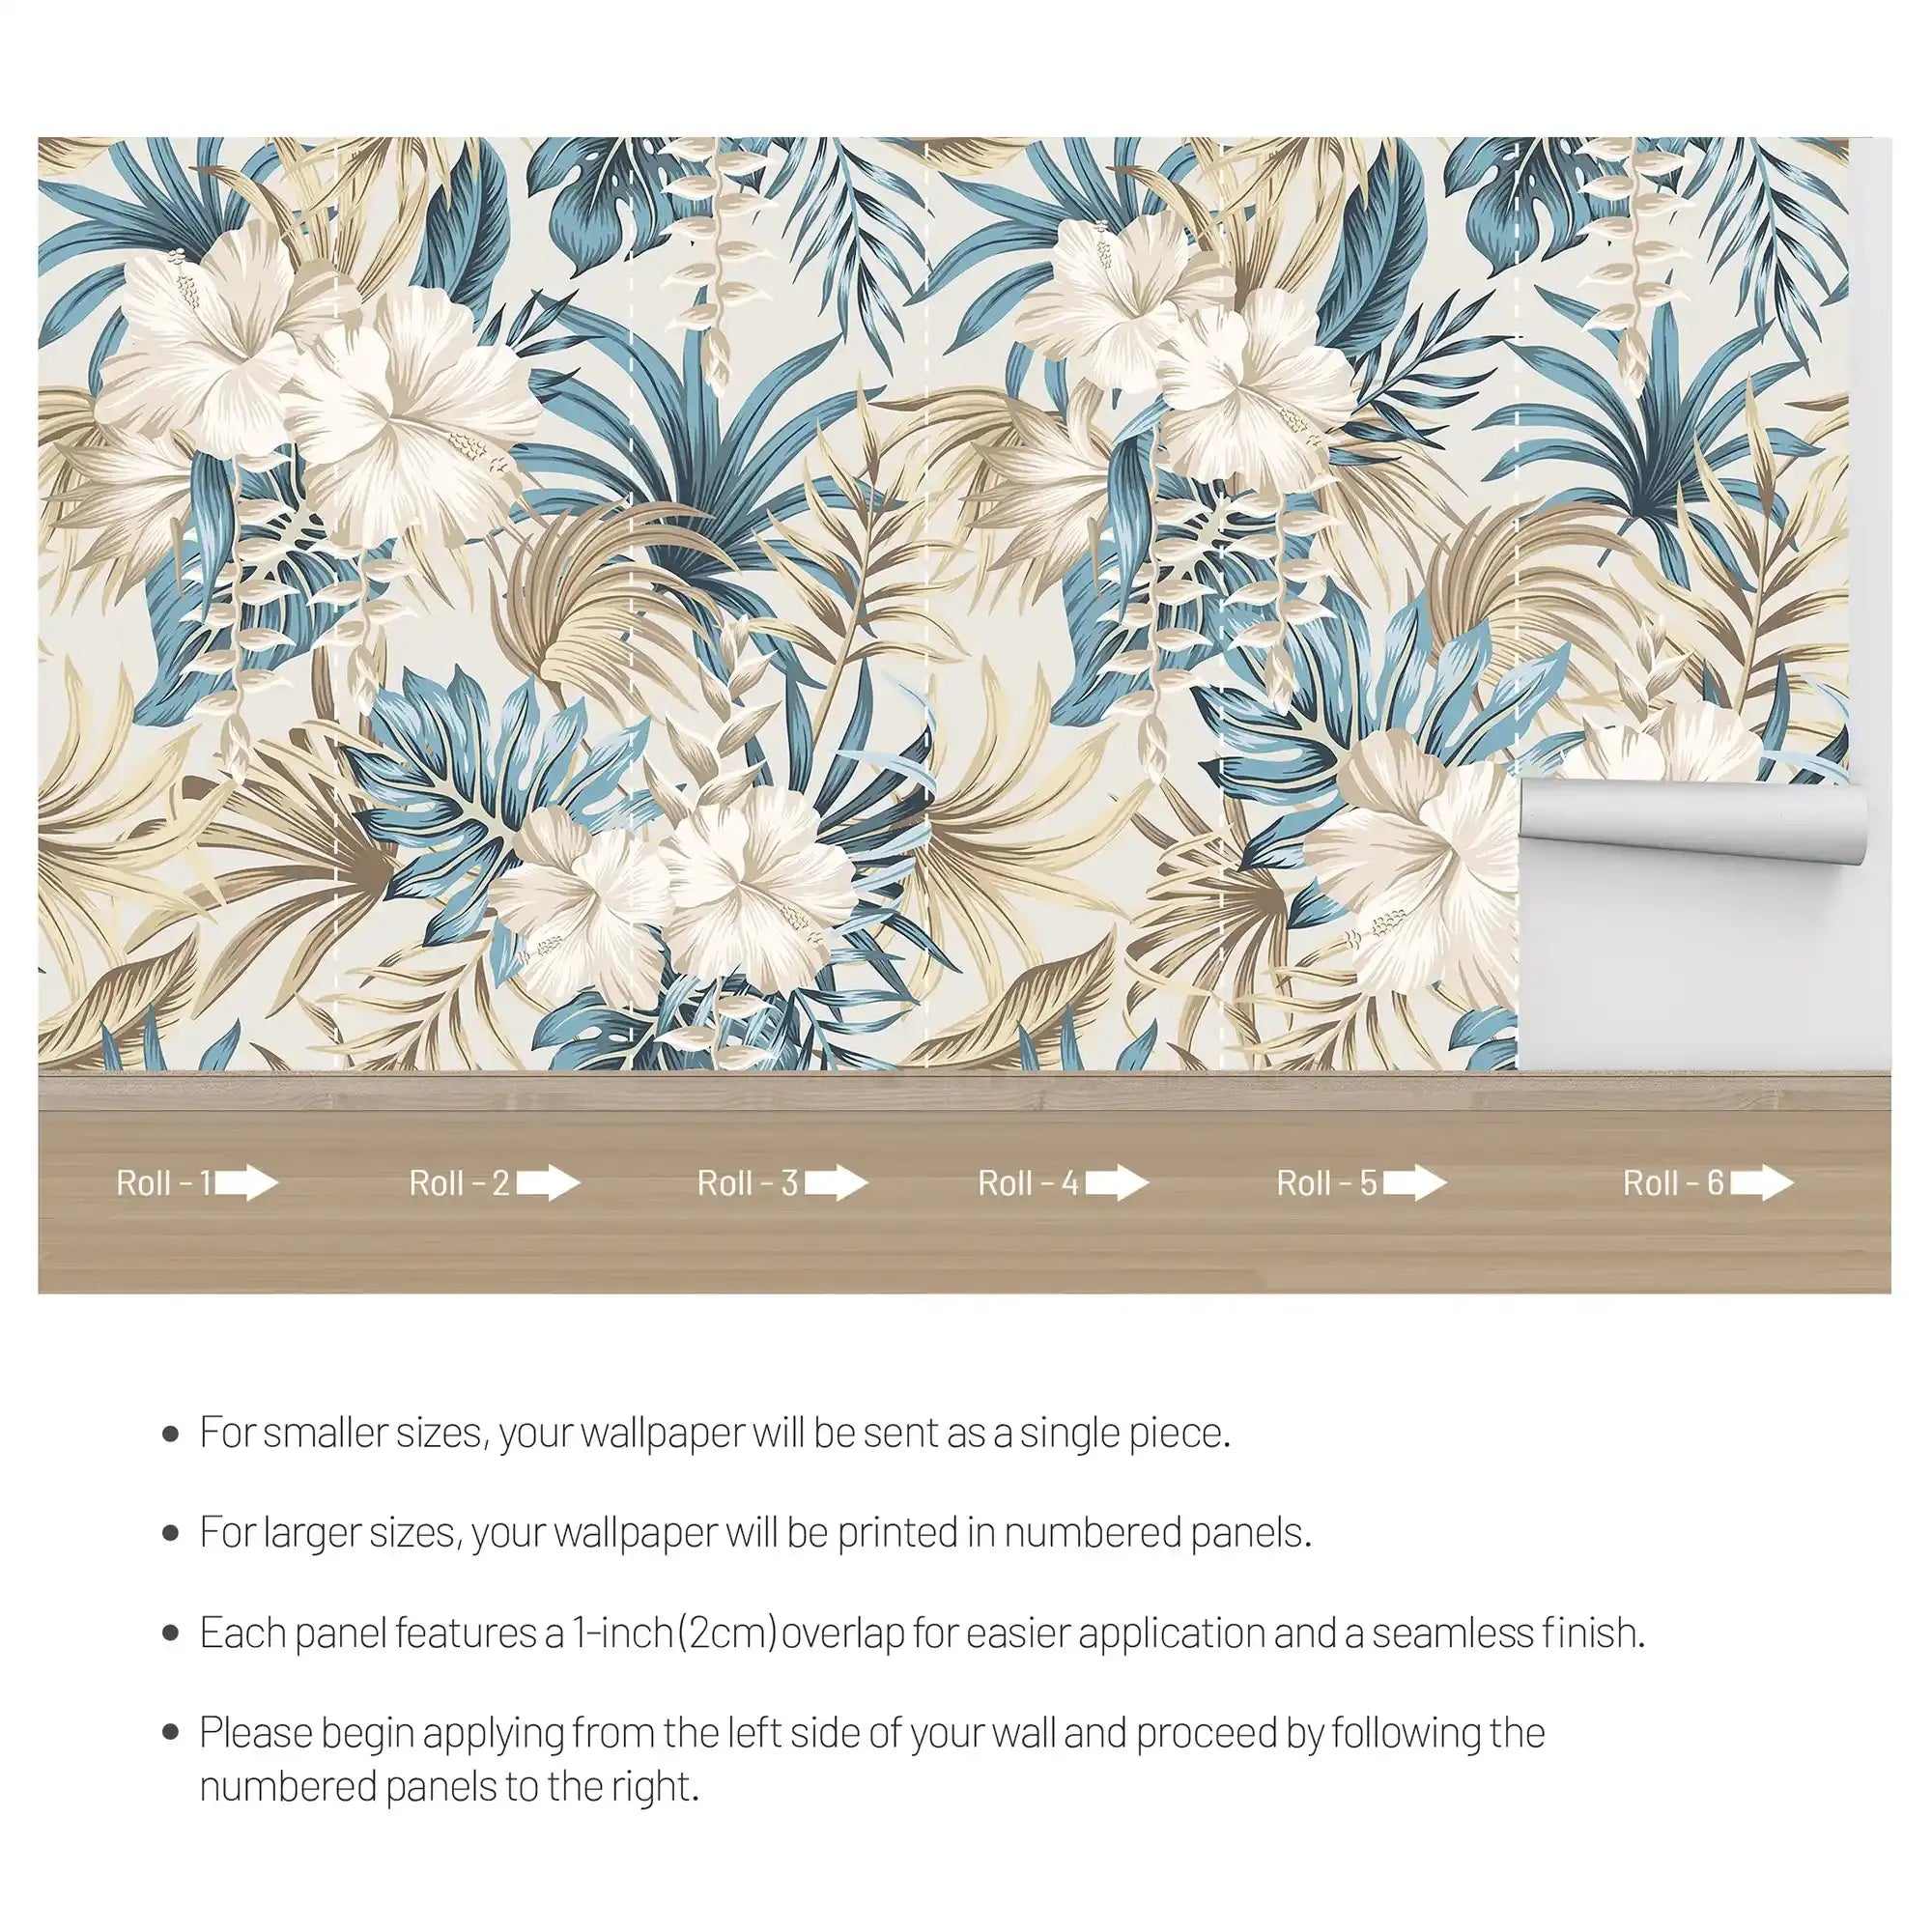 3099-B / Contemporary Floral Peel and Stick Wallpaper, Trendy Tropical Pattern, Adhesive Wall Paper, Easy Installation for Kitchen, Bedroom, Bathroom - Artevella